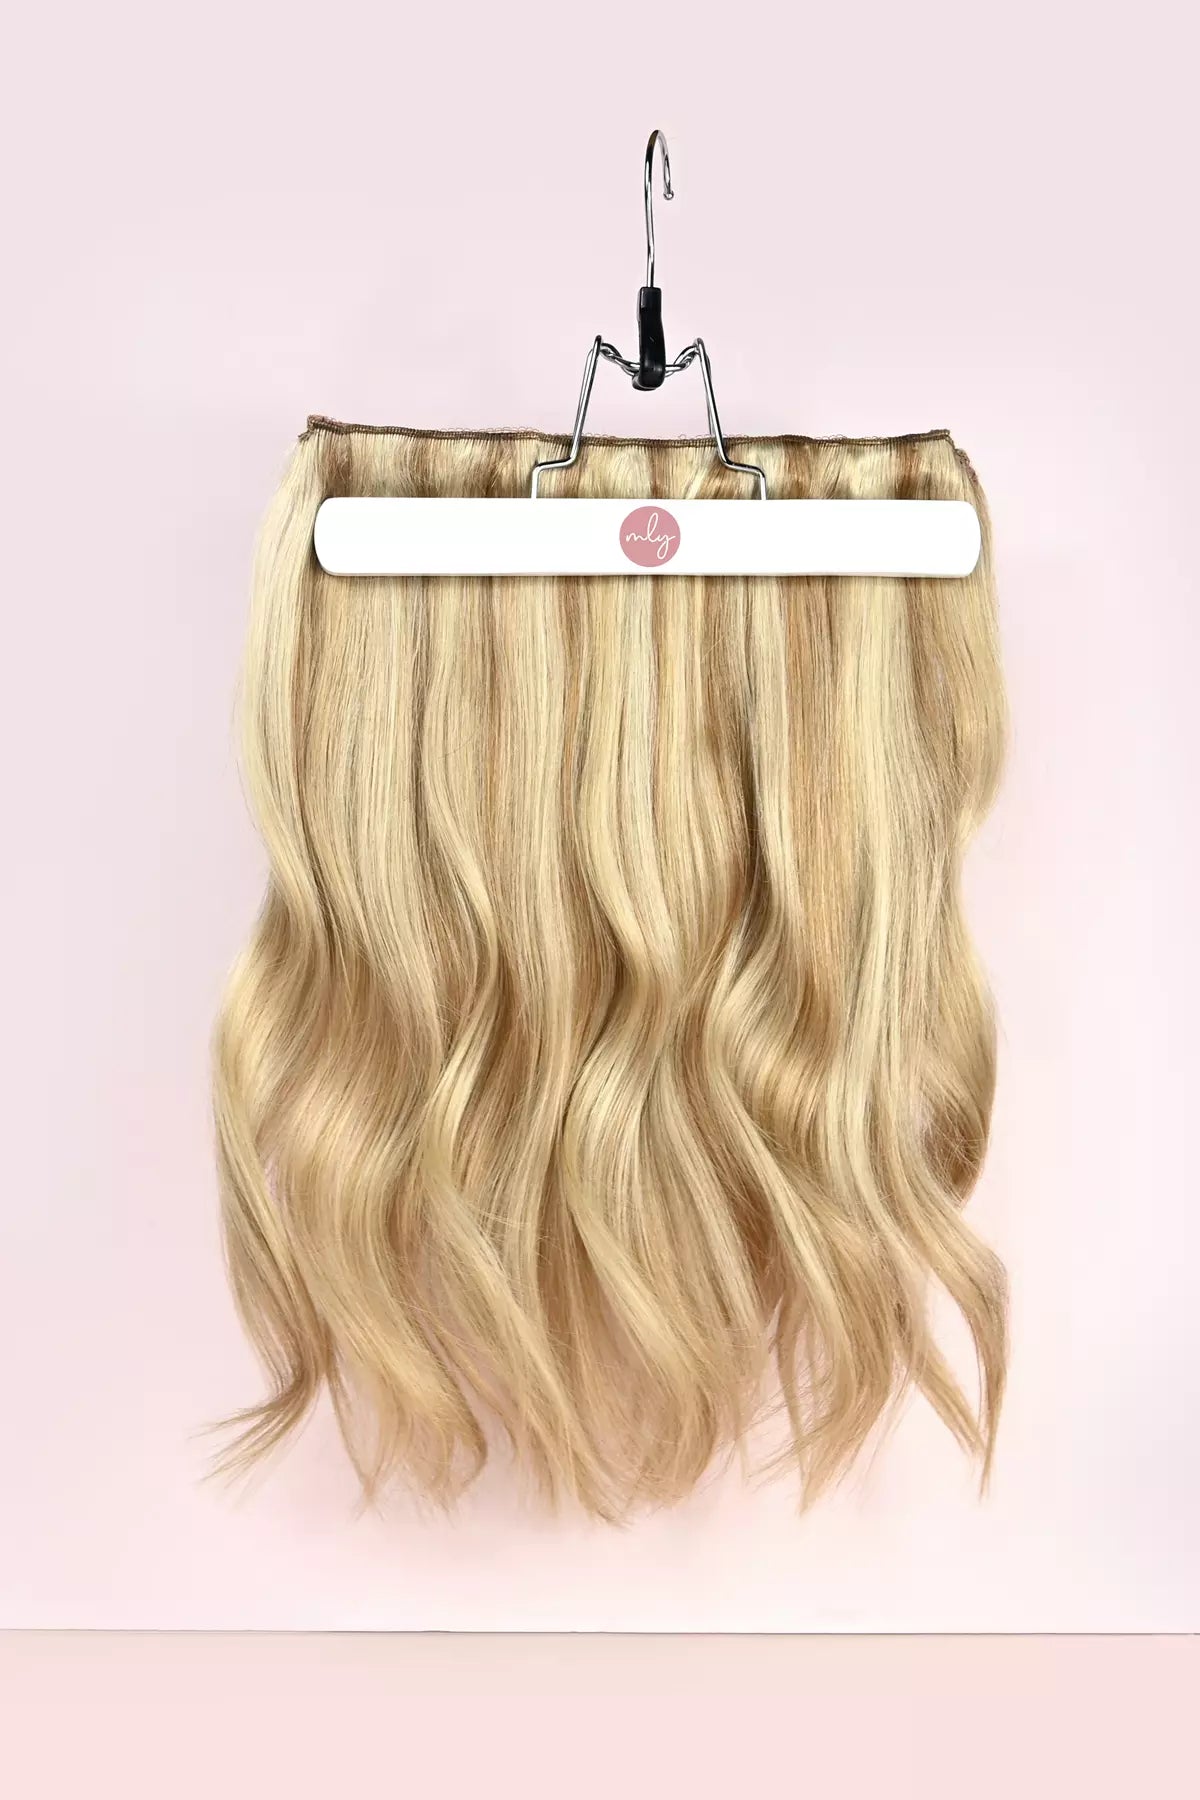 Malaise buurman Dreigend Licht blonde highlights quad weft extensions ☀️ - 1 baan clip in hair – MLY  Hairextensions